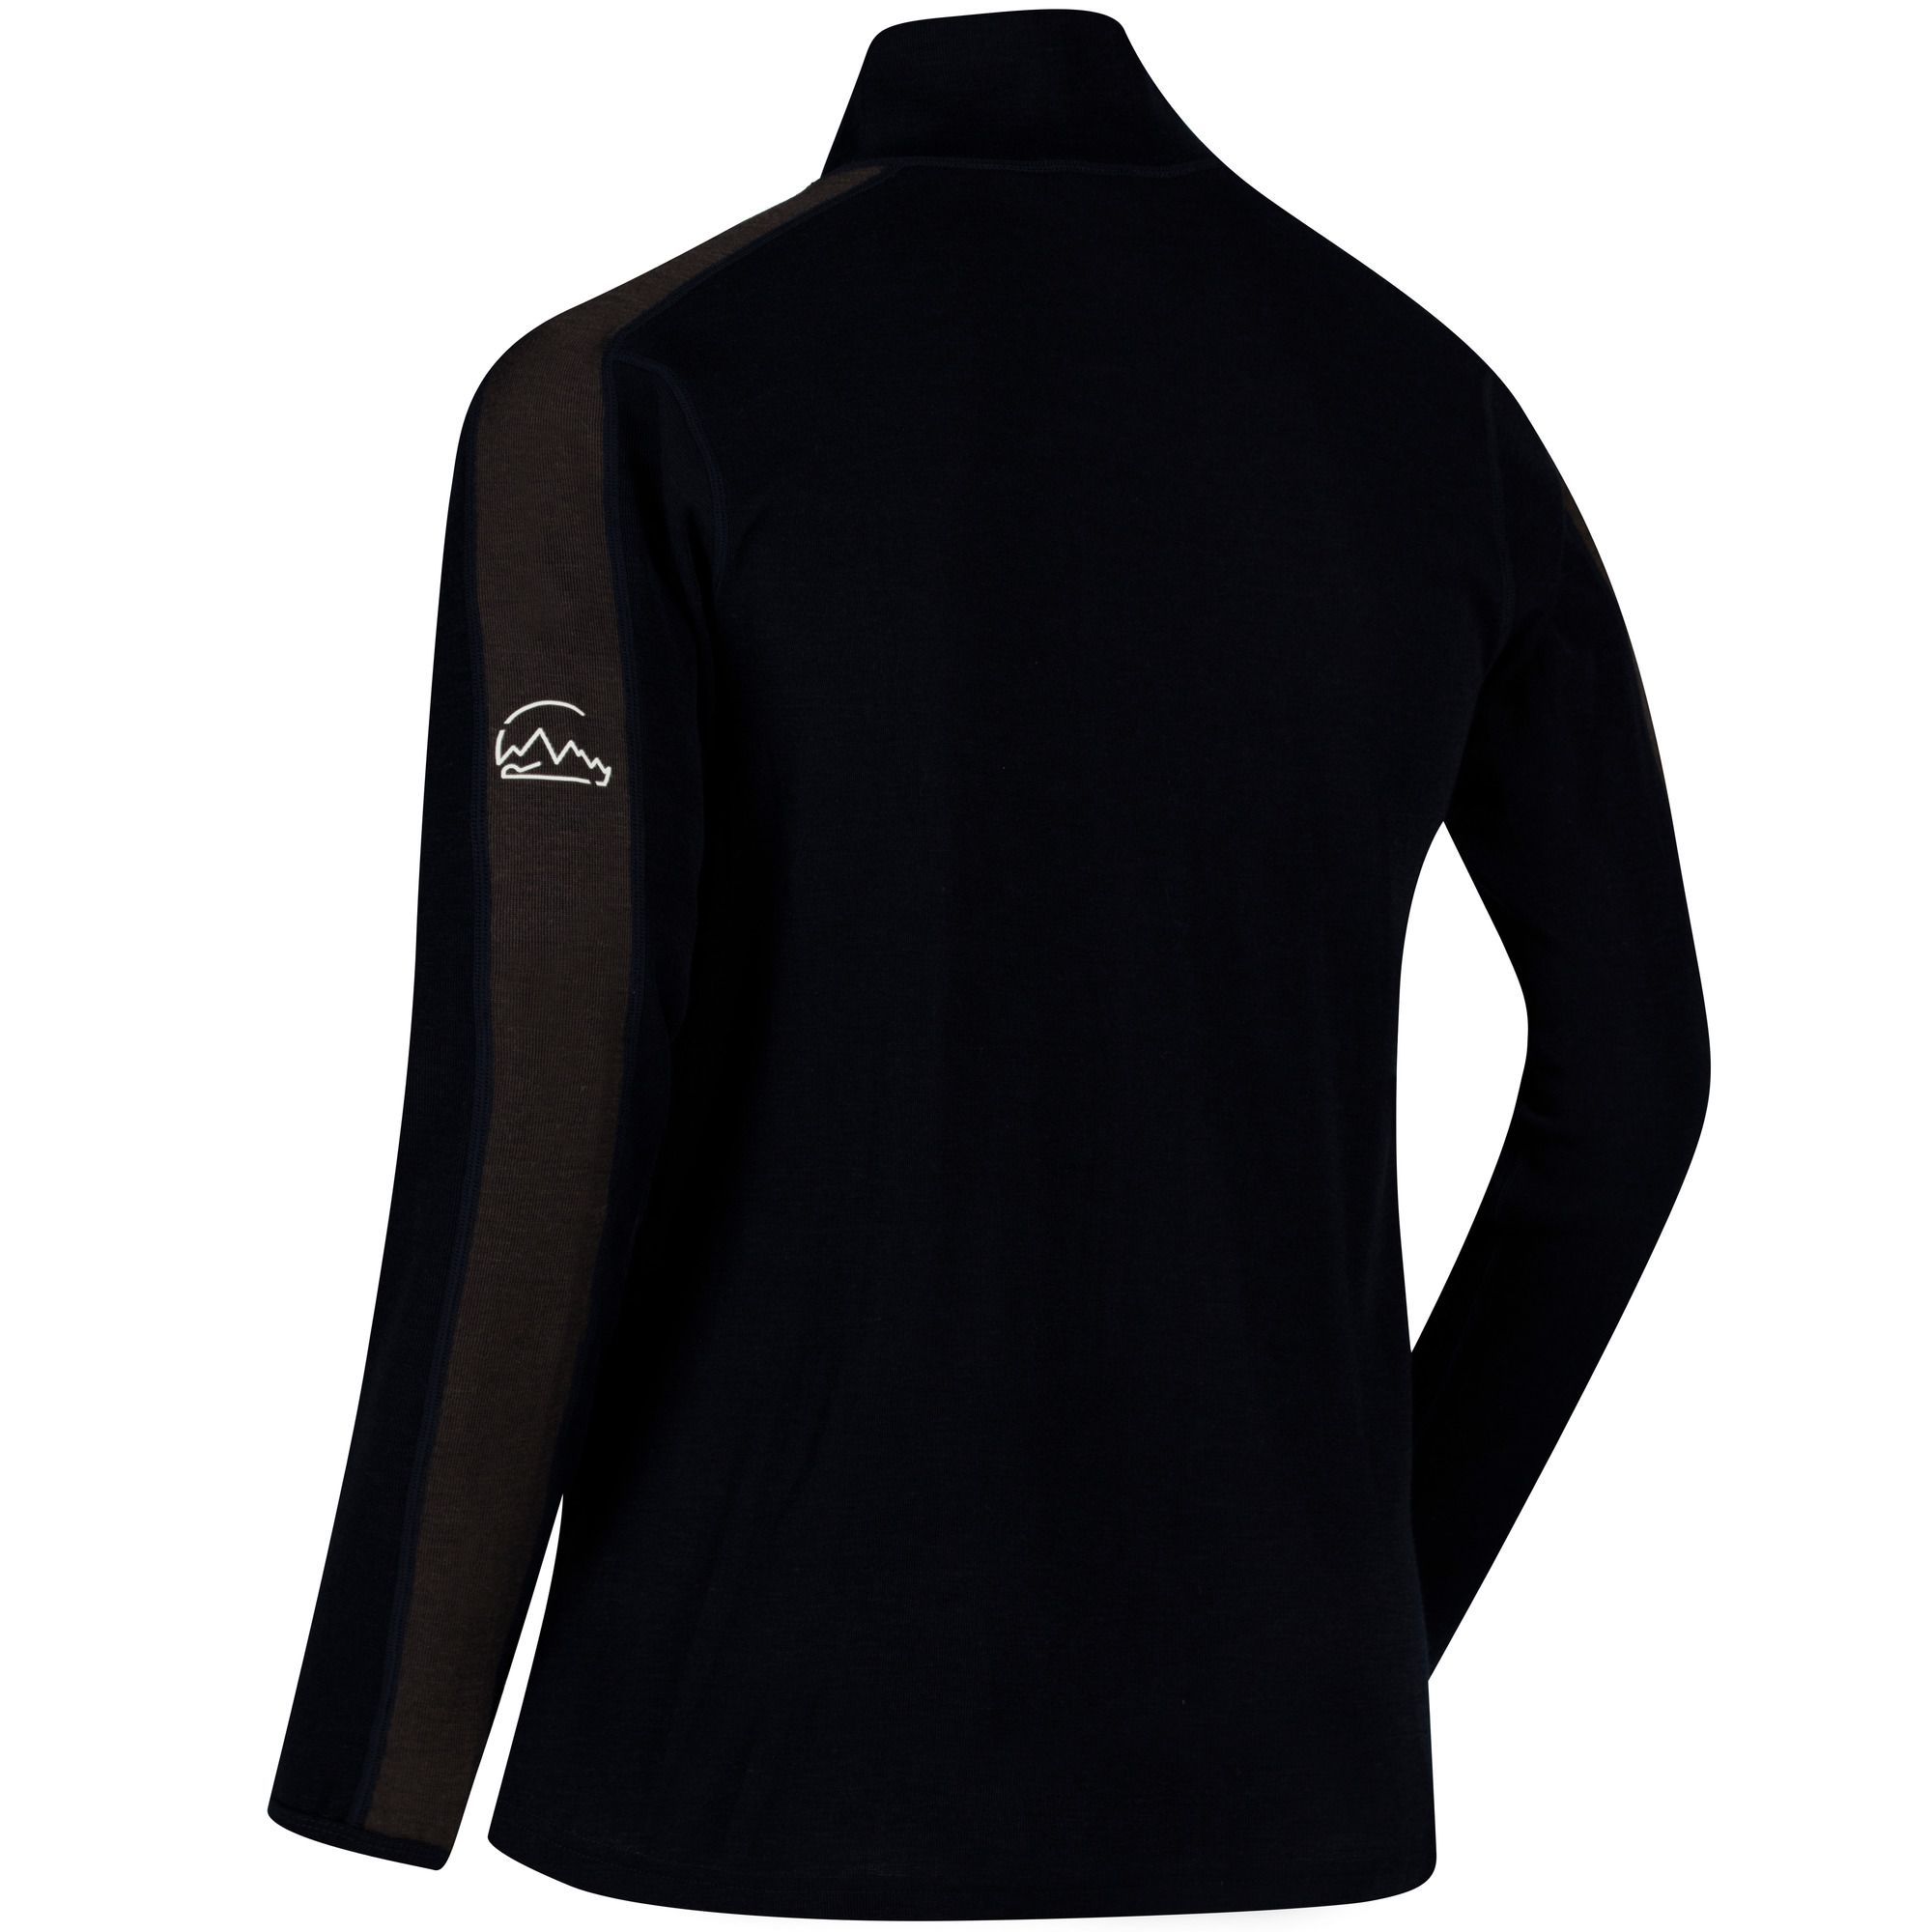 50% Wool, 50% Polyester. Long sleeved Merino wool blend base layer. Wicking and odour control. With a snug funnel neck and the Regatta embroidery on the left shoulder.